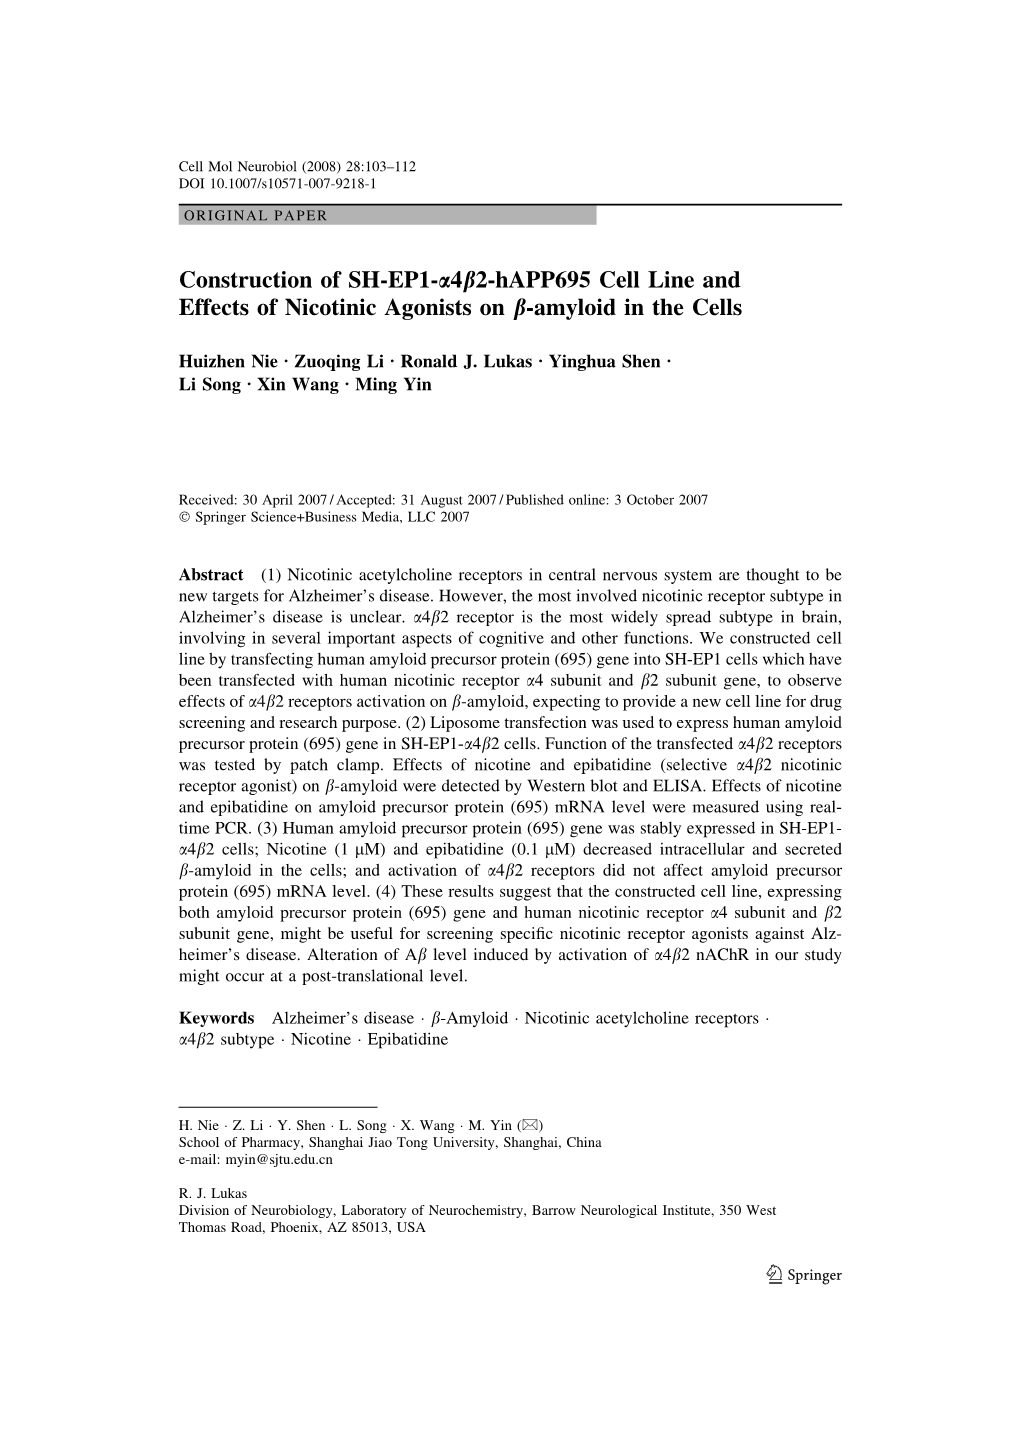 Construction of SH-EP1-A4b2-Happ695 Cell Line and Effects of Nicotinic Agonists on B-Amyloid in the Cells